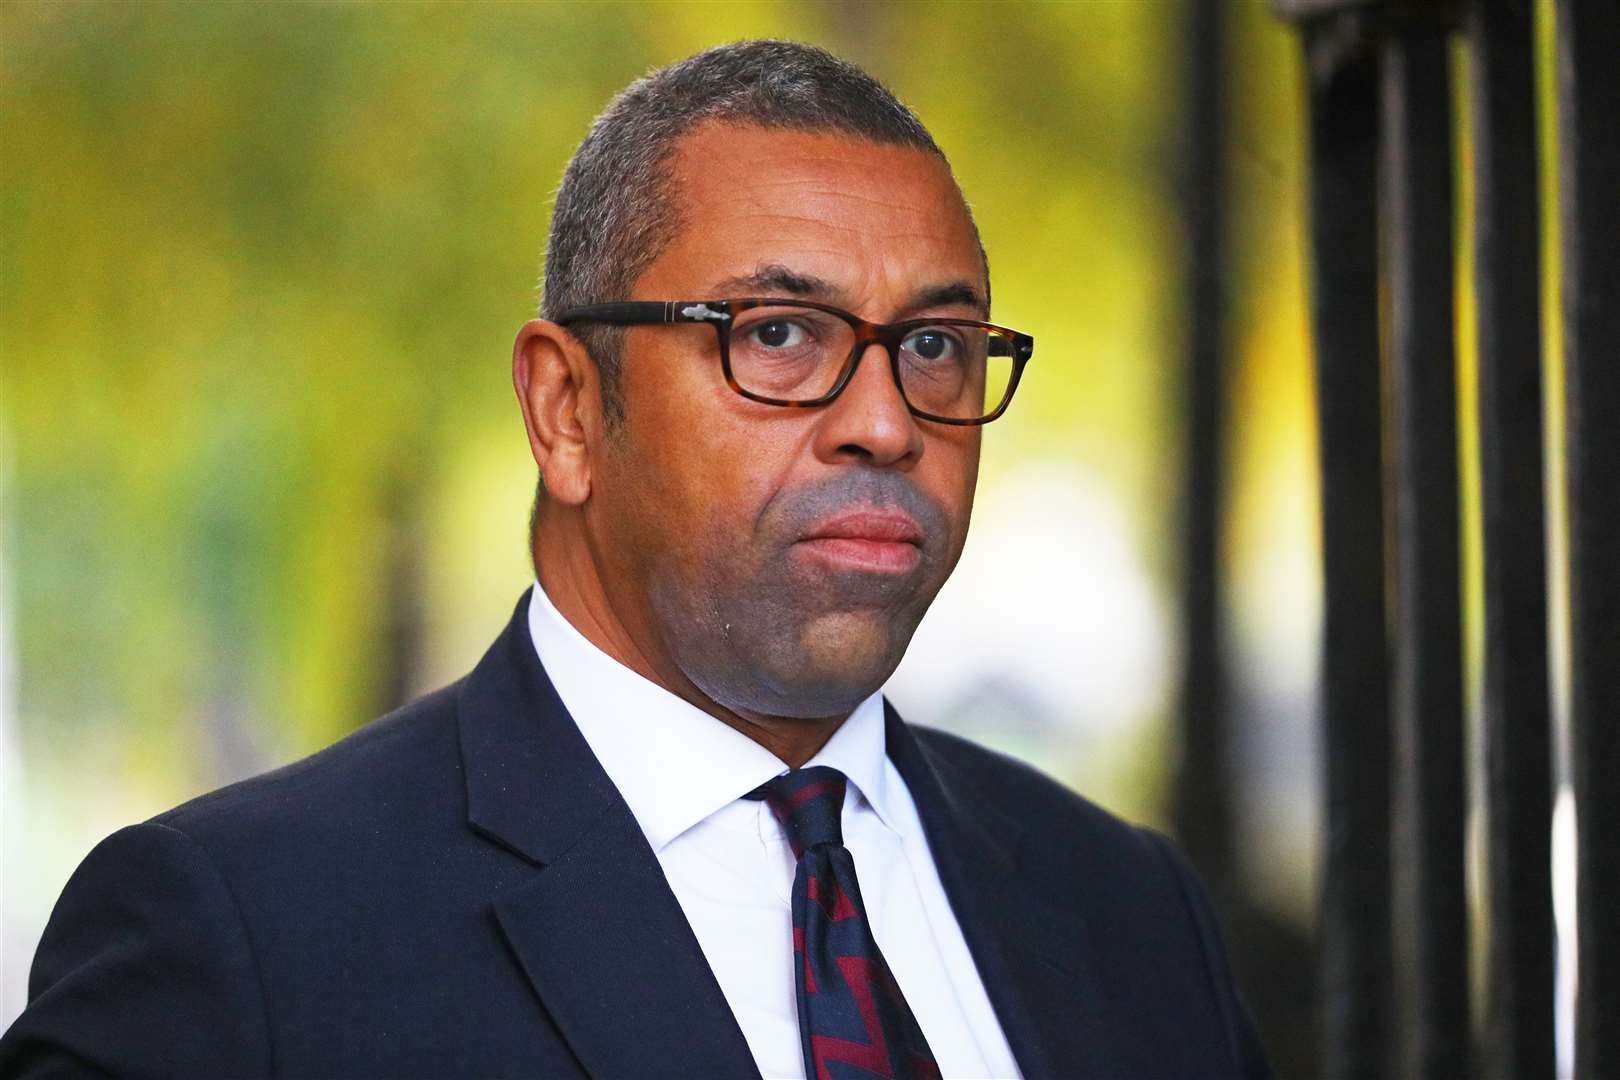 James Cleverly who has been appointed Education Secretary